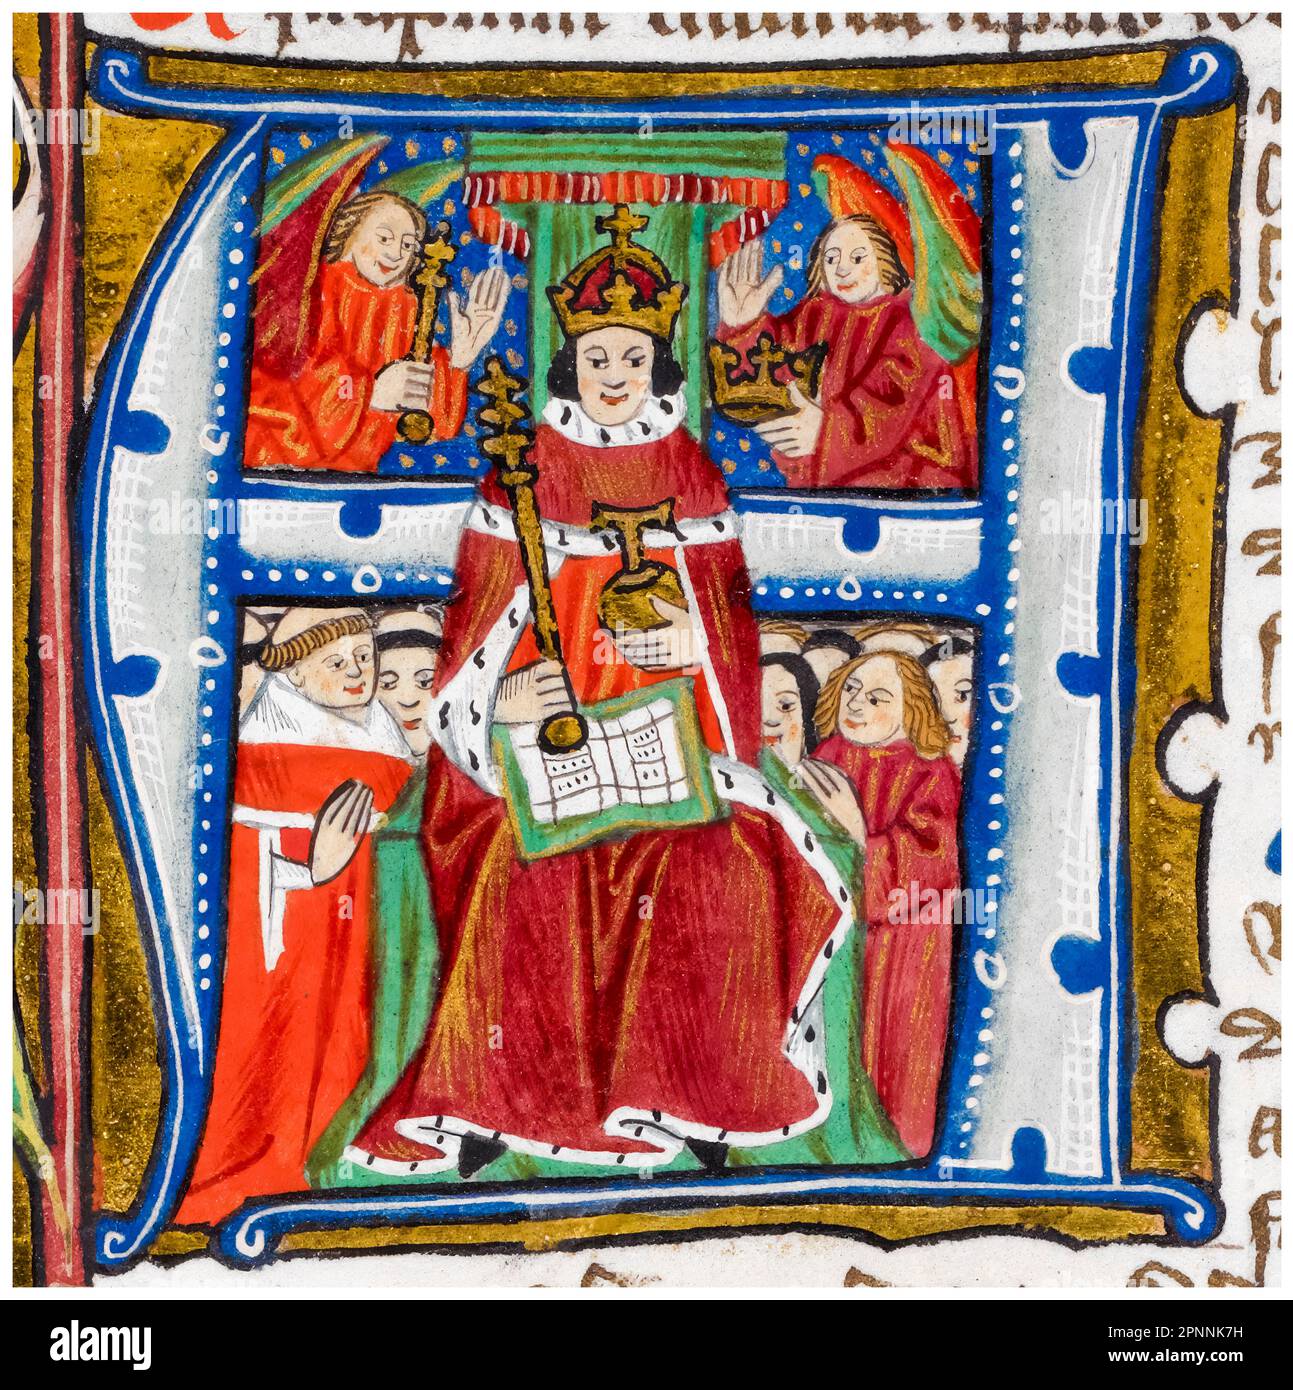 Henry VI of England (1421-1471), King of England (1422-1461) and (1470-1471), disputed King of France (1422-1453), wearing a crown, ermine robe and holding an orb and sceptre, illustrated in an historiated initial A and surrounded by Angels, miniature illuminated manuscript portrait painting by The Placentius Master, 1488-1489 Stock Photo